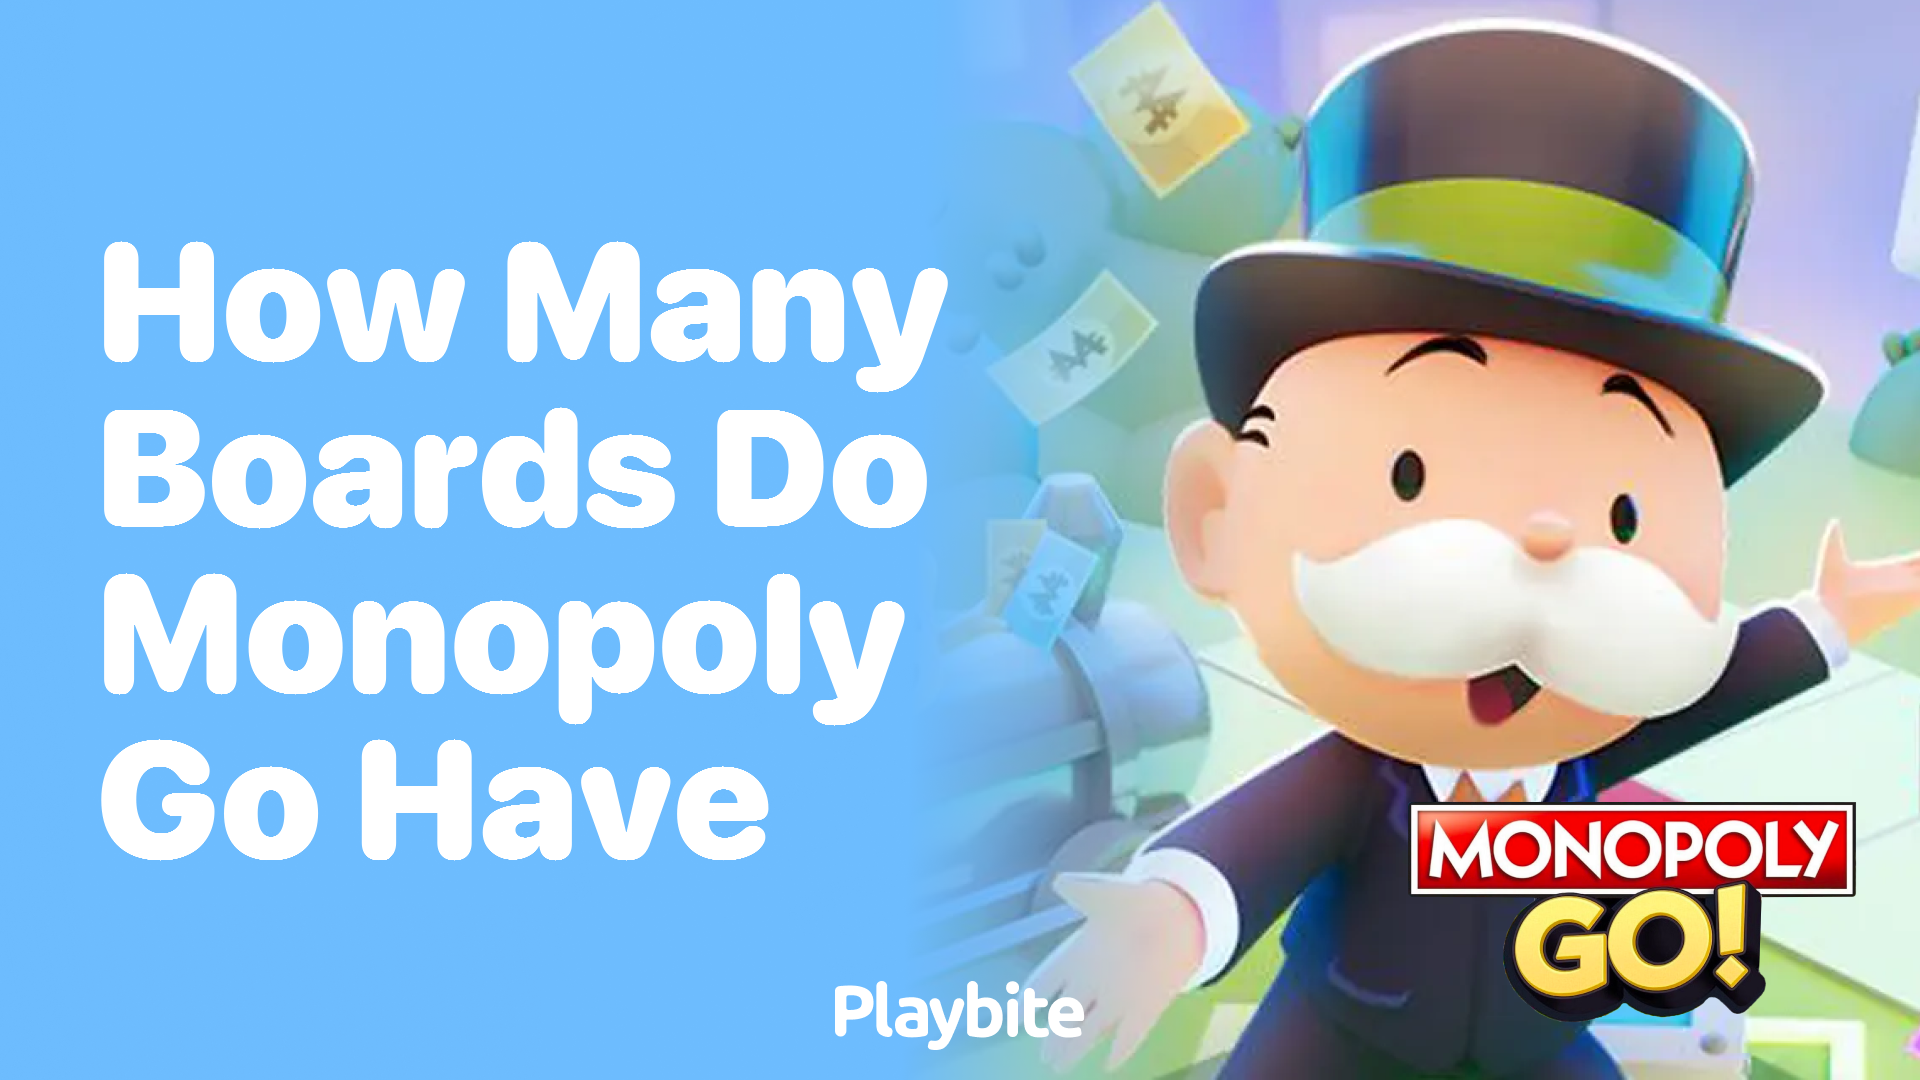 How Many Boards Does Monopoly Go Have?